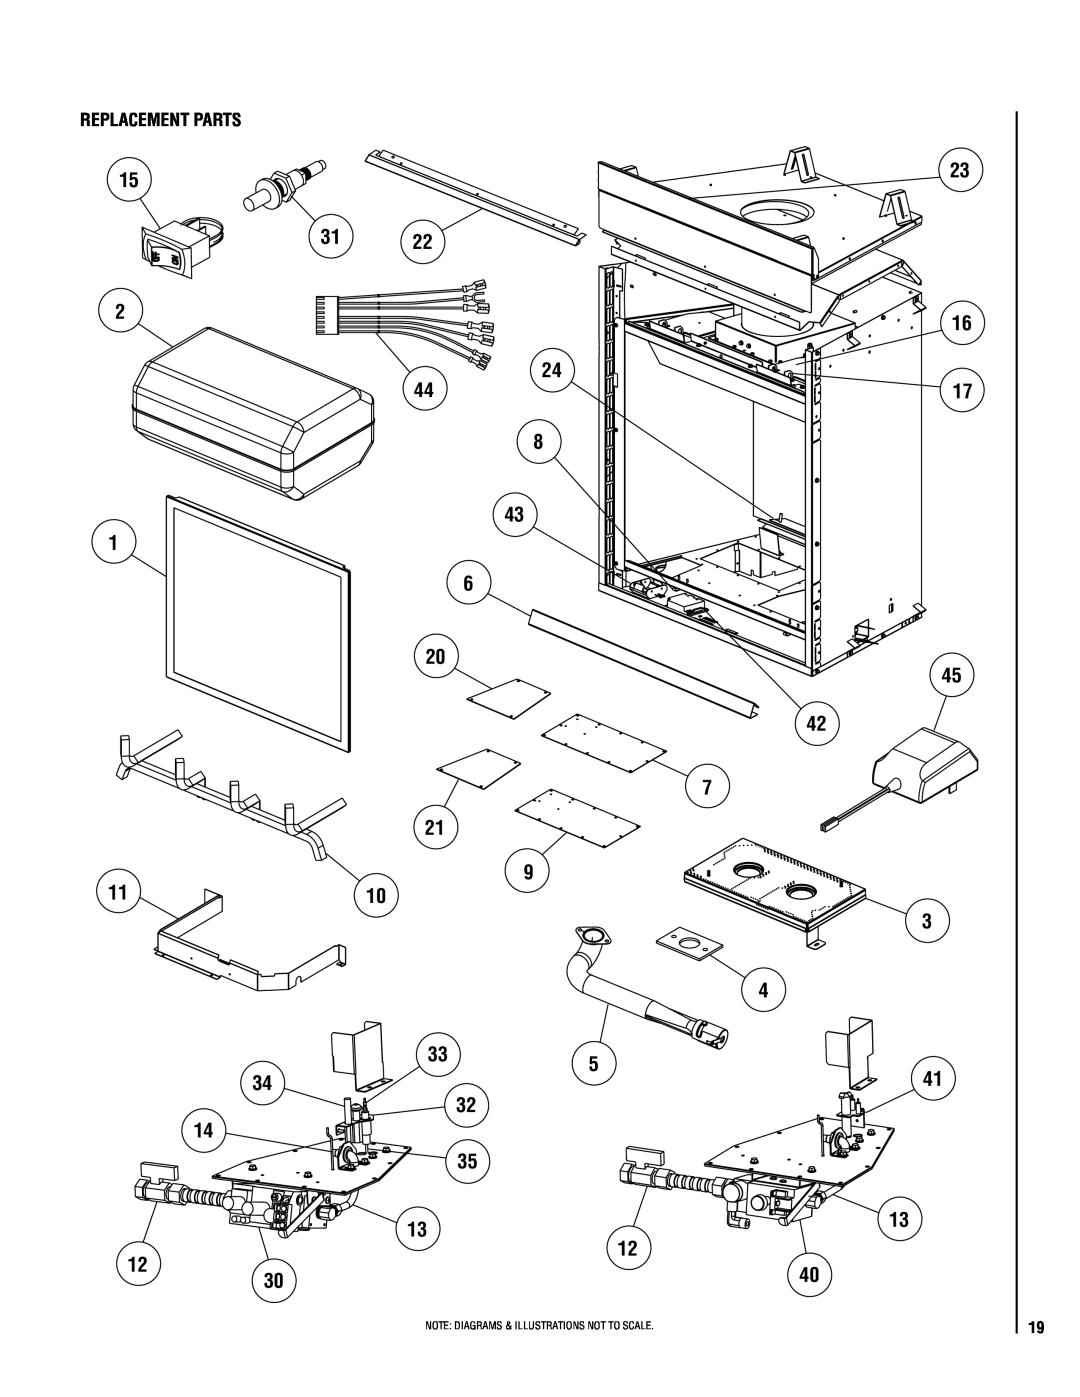 Lennox Hearth MP53-VDLE, MN04-VDLE, MP54-VDLE, EN54-VDLE manual Replacement Parts, Note Diagrams & Illustrations Not To Scale 